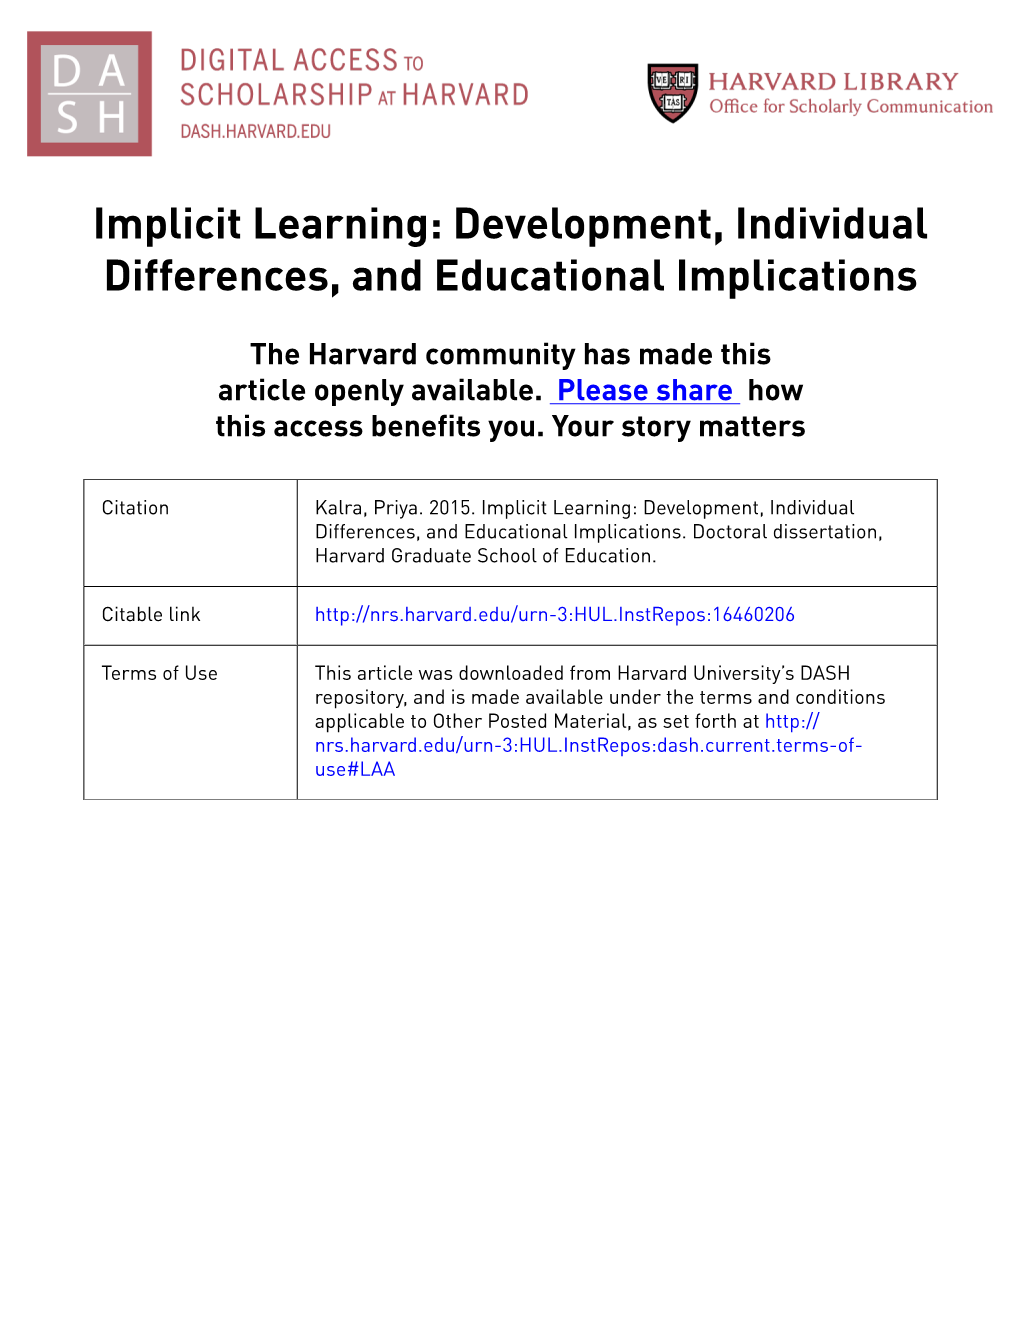 Implicit Learning: Development, Individual Differences, and Educational Implications